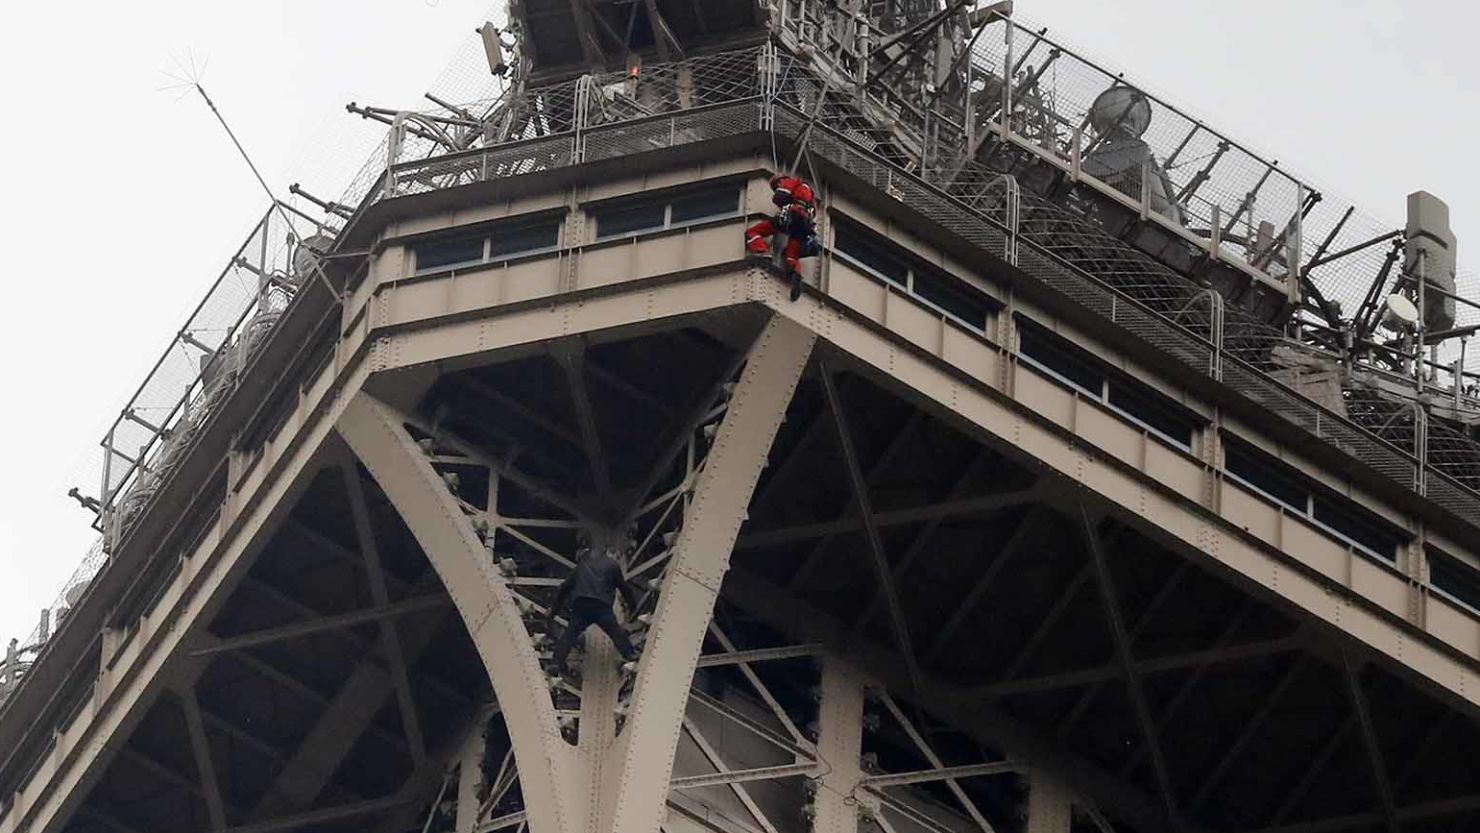 The Eiffel Tower has been closed to visitors after a man was seen scaling it.